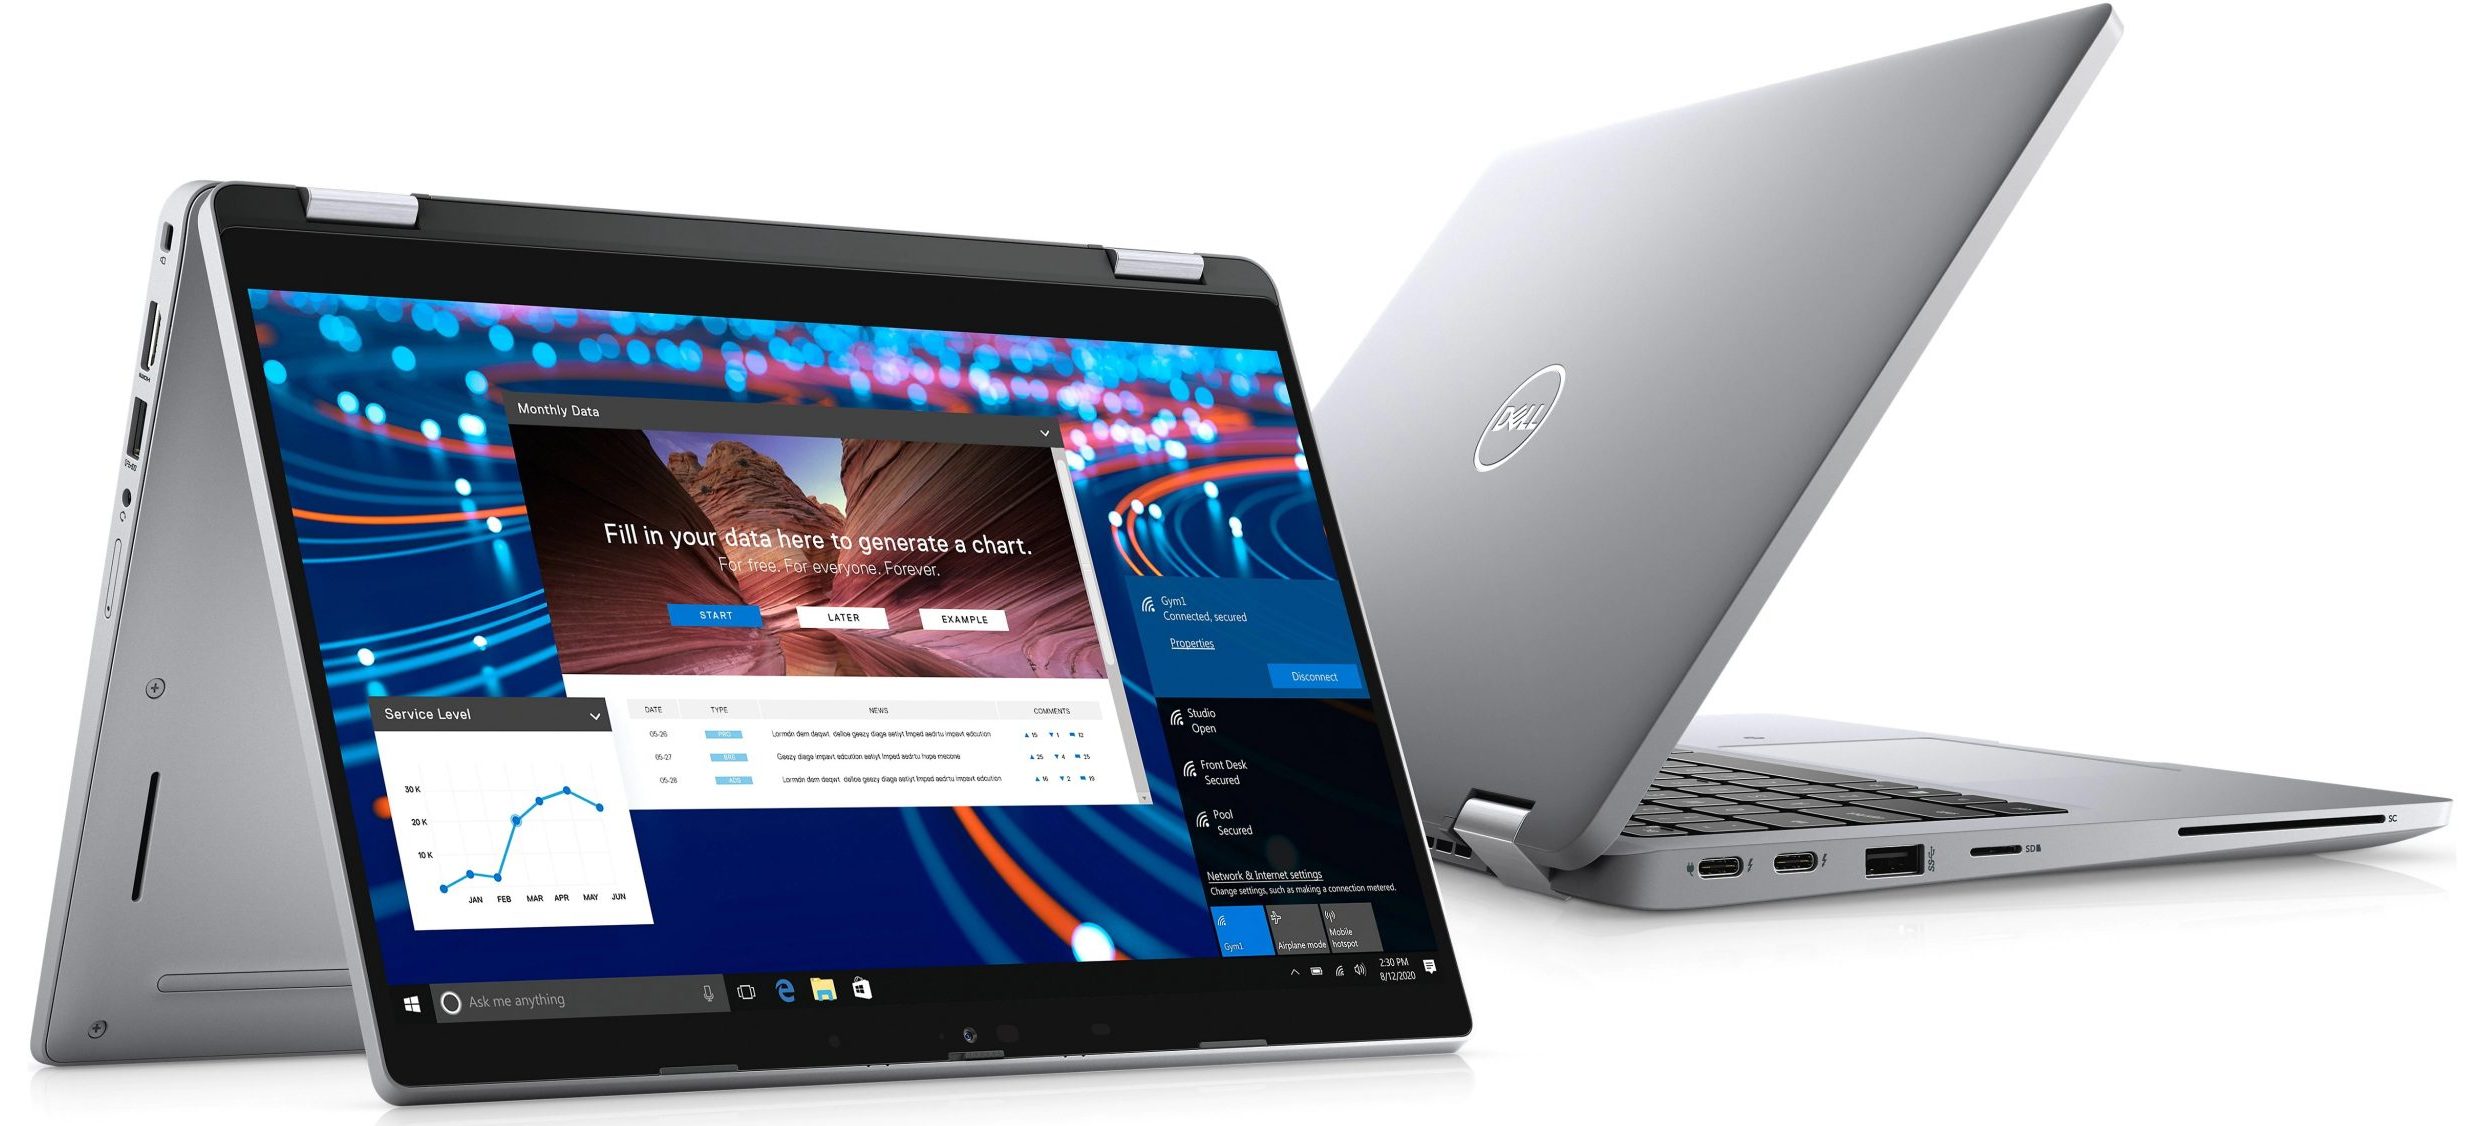 Dell Latitude 13 5320 (2-in-1) - Specs, Tests, and Prices